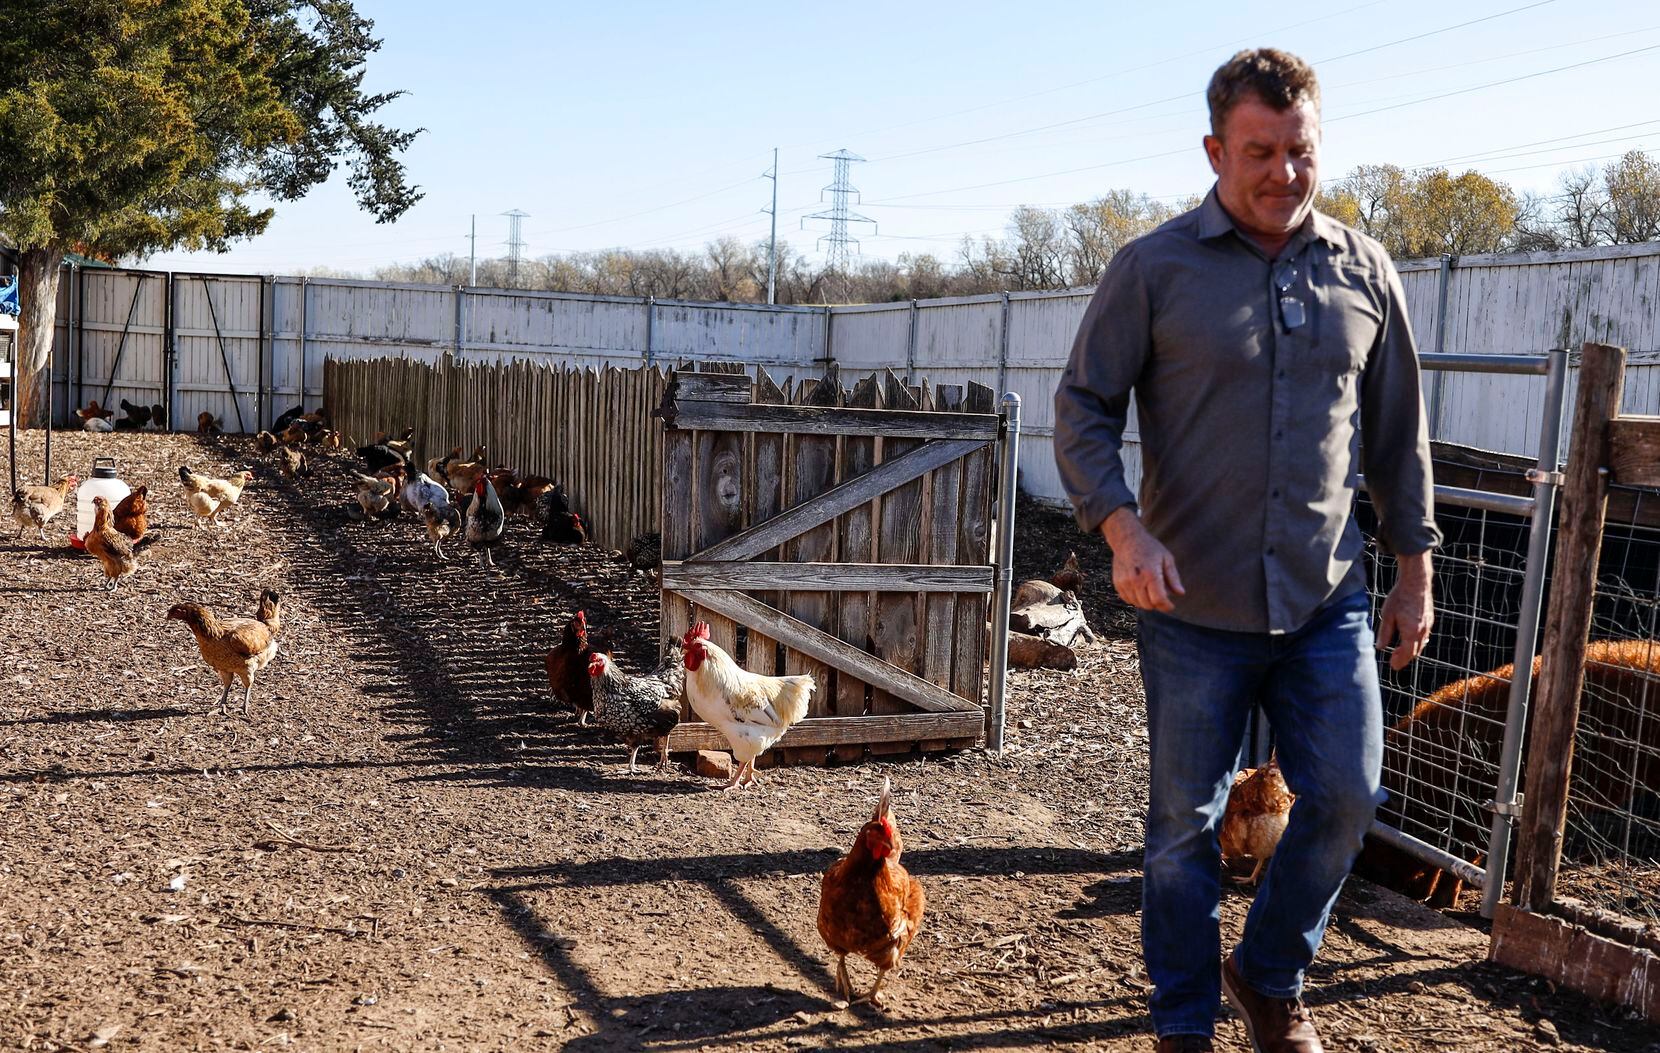 Daron Babcock leaves his pig, Libby, in a pen while chickens roam at Bonton Farms in South Dallas. The chickens' eggs are sold at the market, along with milk from the operation's goat herd.